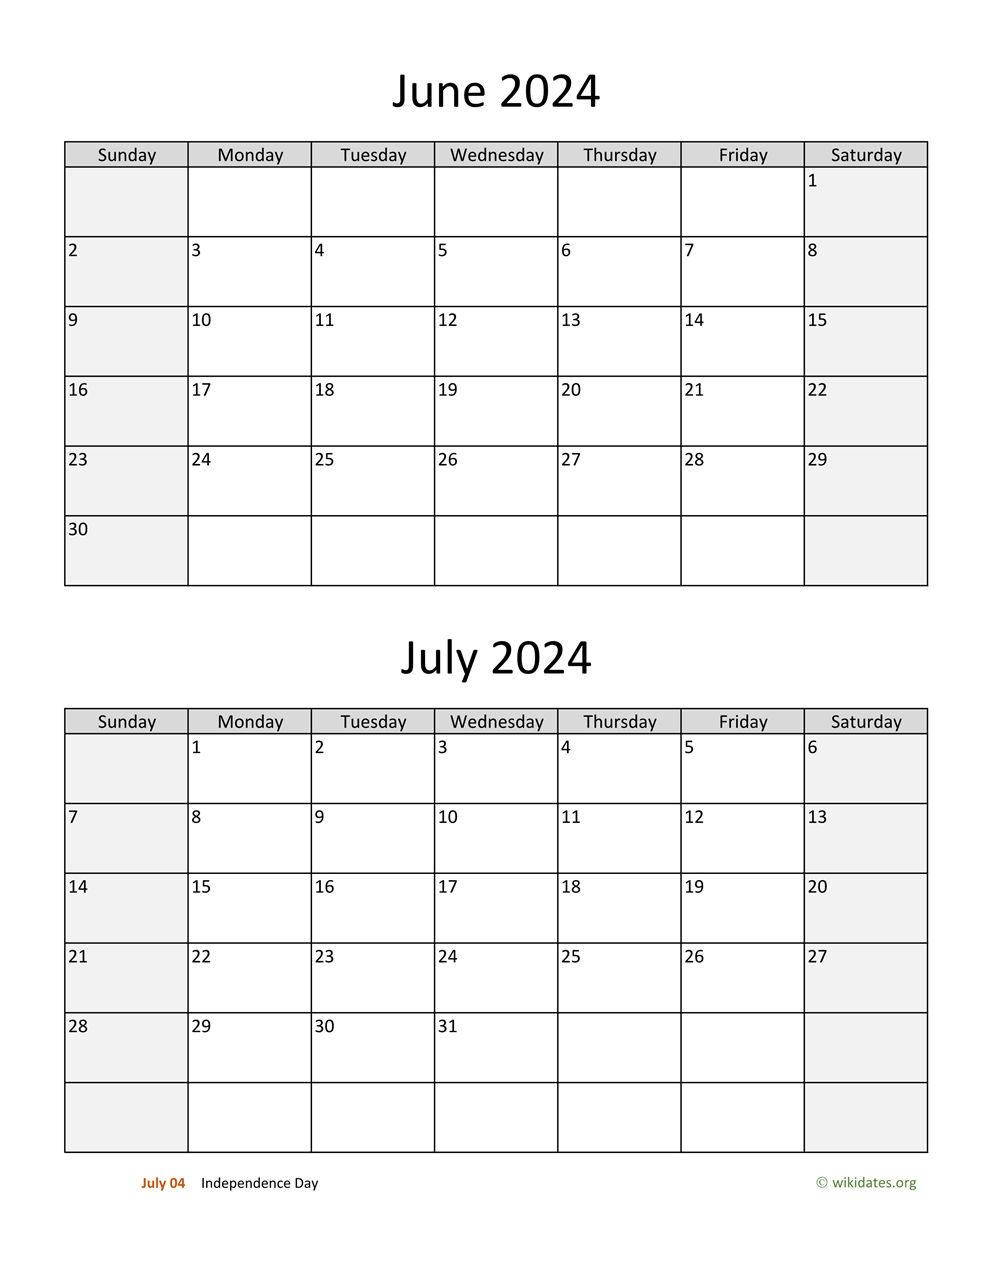 June And July 2024 Calendar | Wikidates for Free Printable Calendar June And July 2024